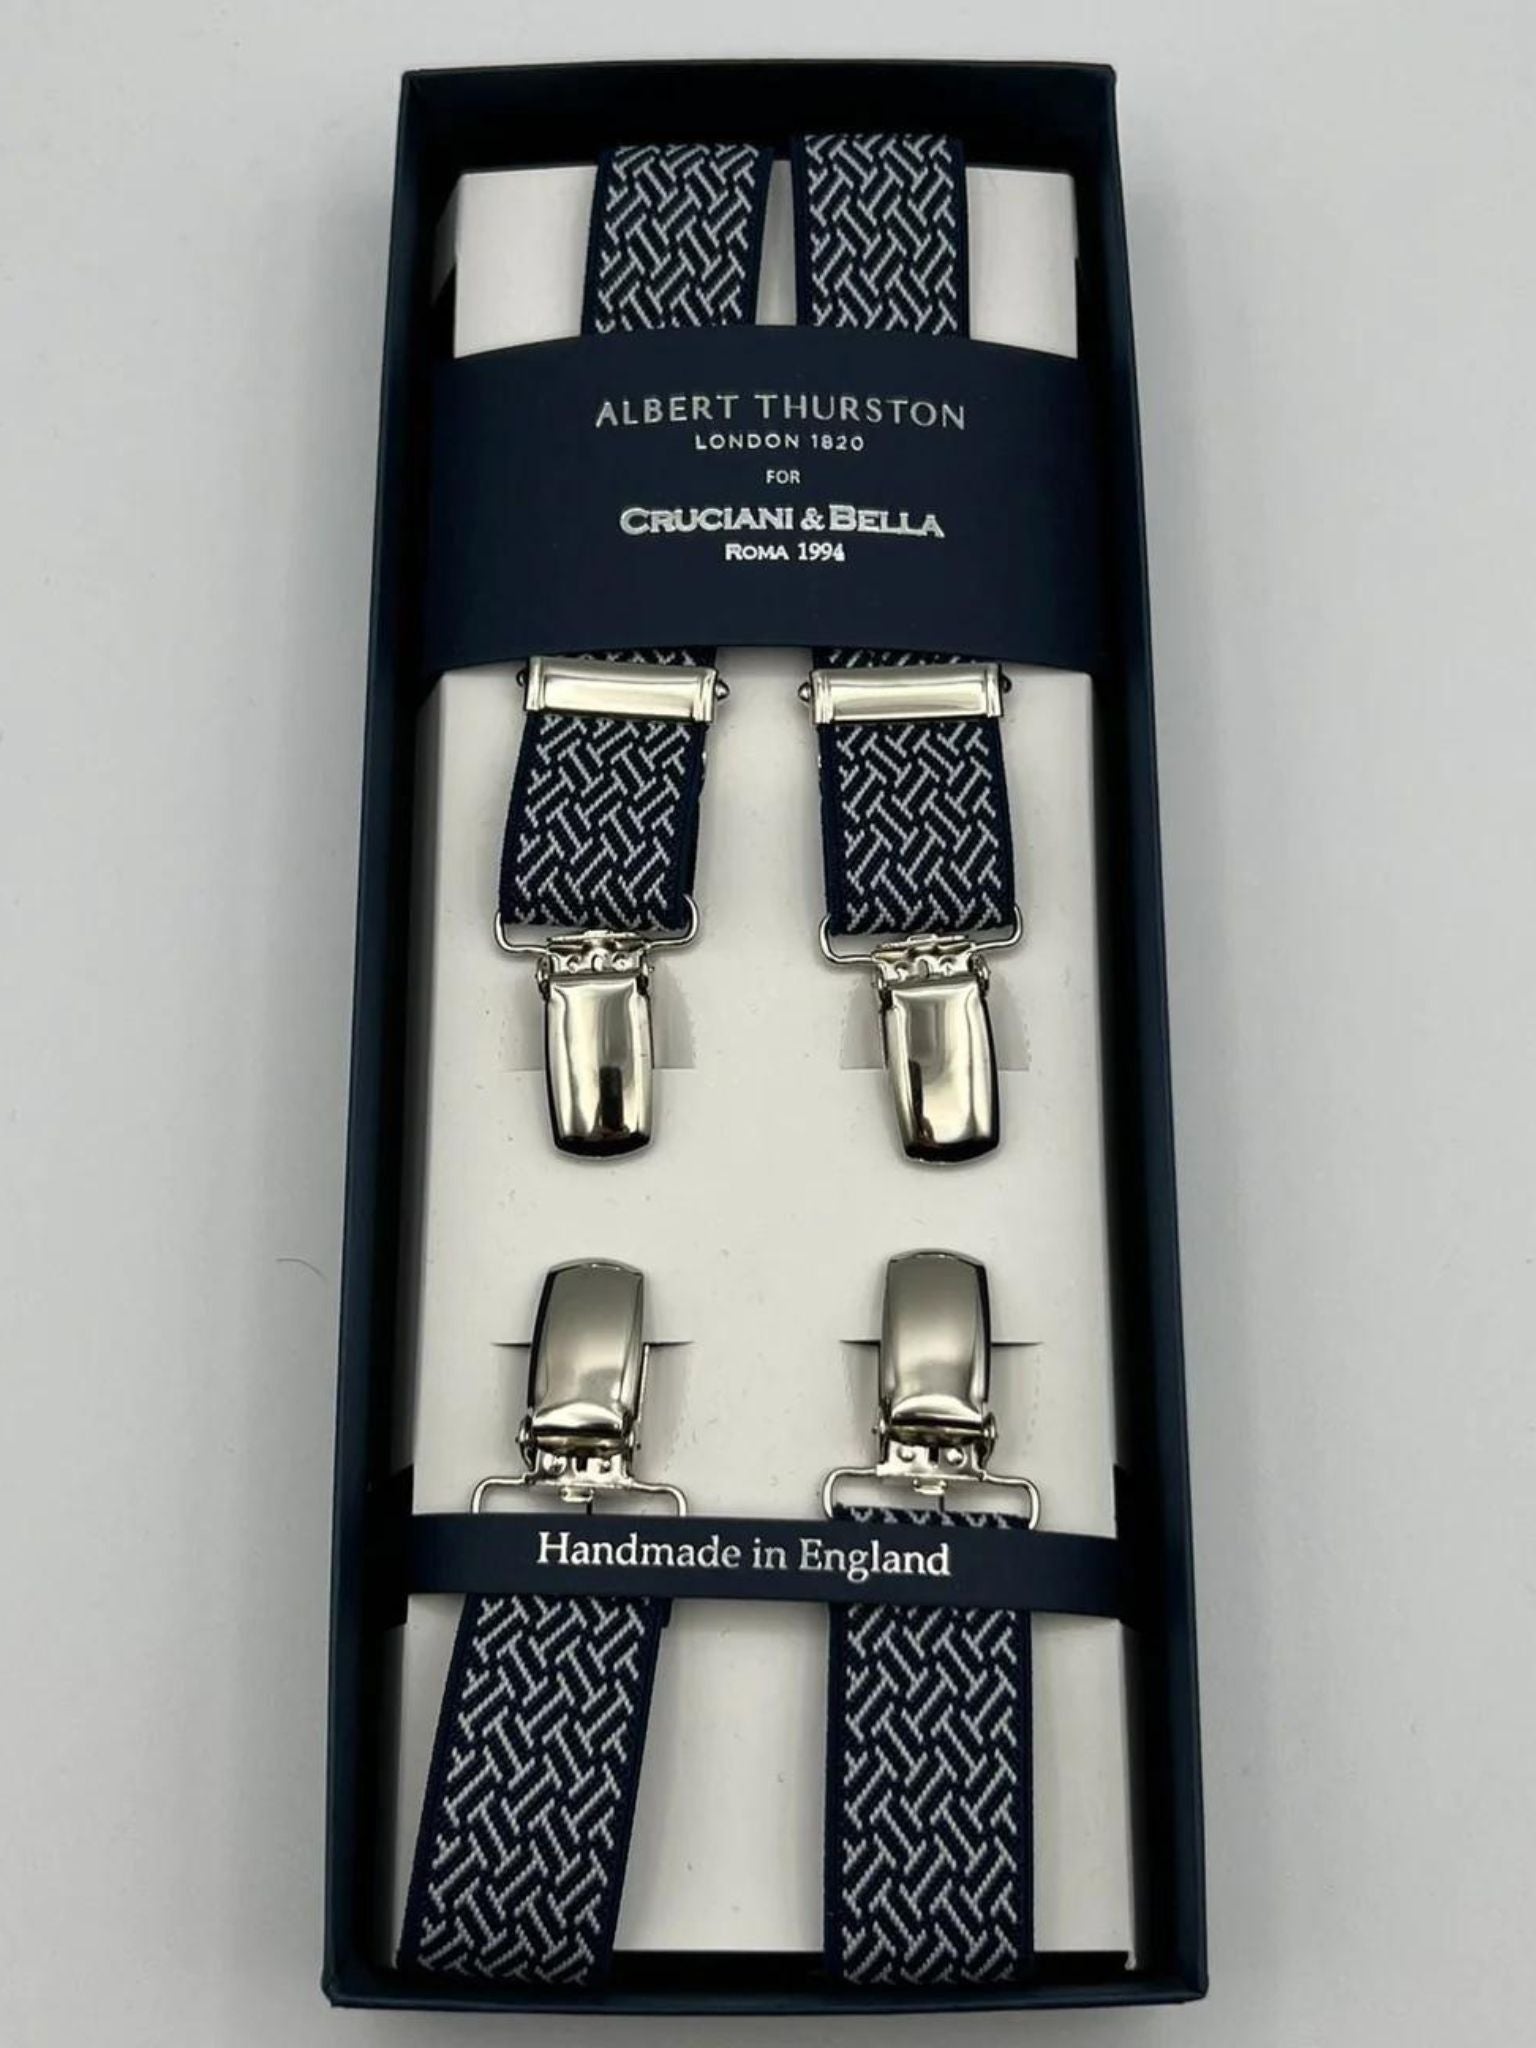 Albert Thurston for Cruciani & Bella Made in England Clip on Adjustable Sizing 25 mm elastic braces Blue and White Motif X-Shaped Nickel Fittings Size: L